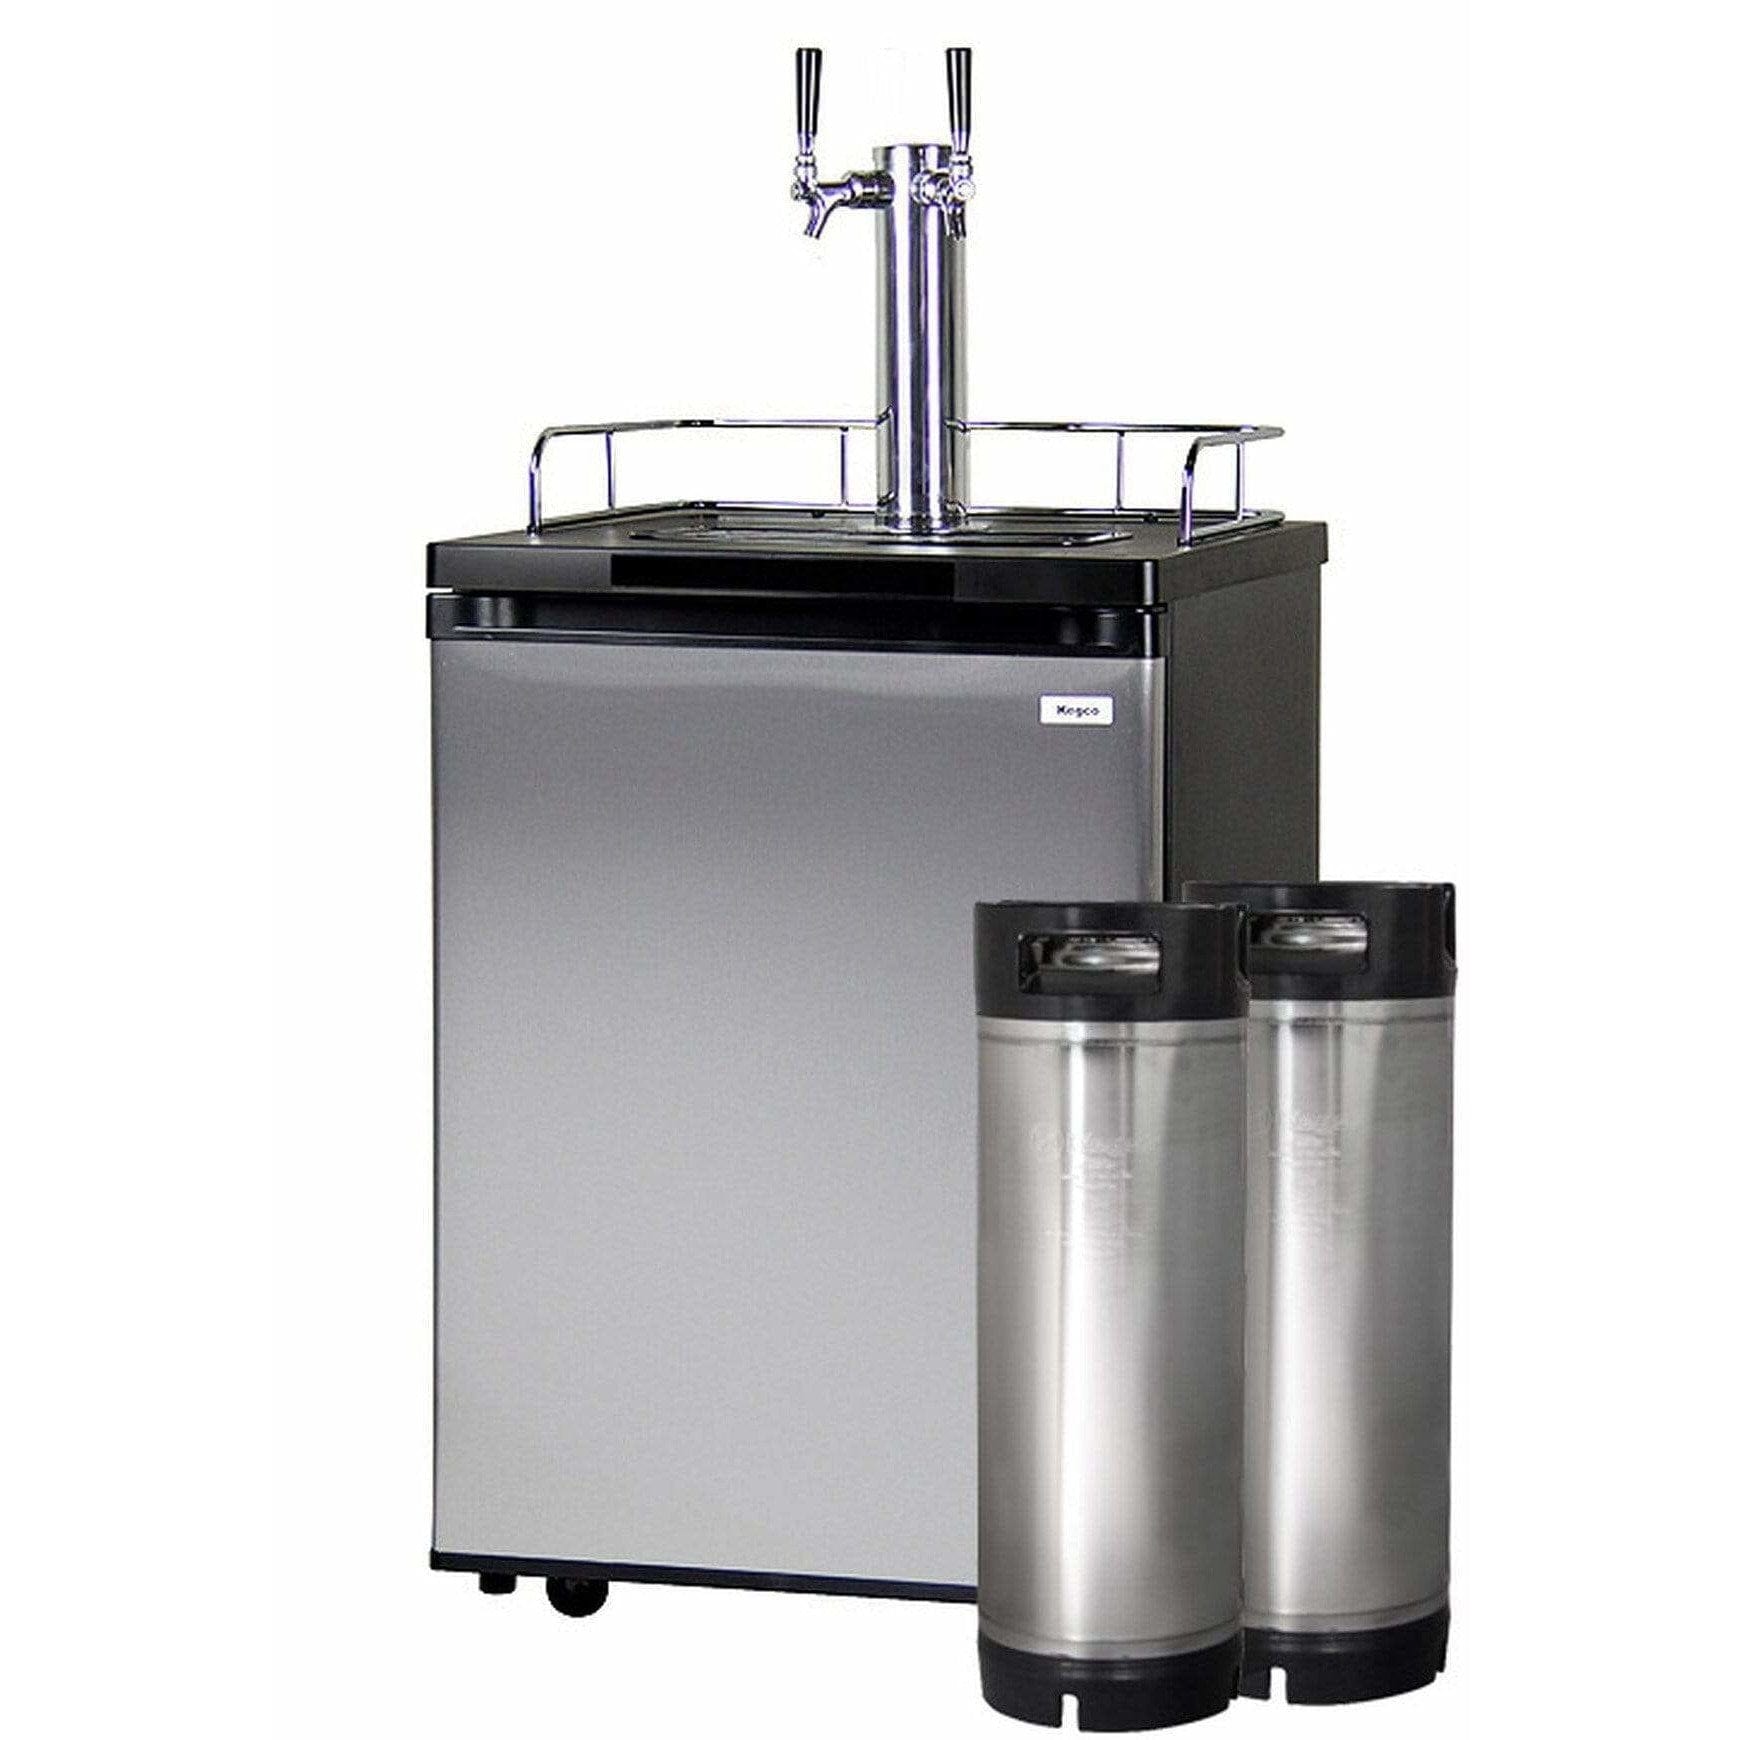 Kegco Home Brew Kegerator-Black Cabinet and Stainless Steel Door Home Brew HBK209S-2K Wine Coolers Empire